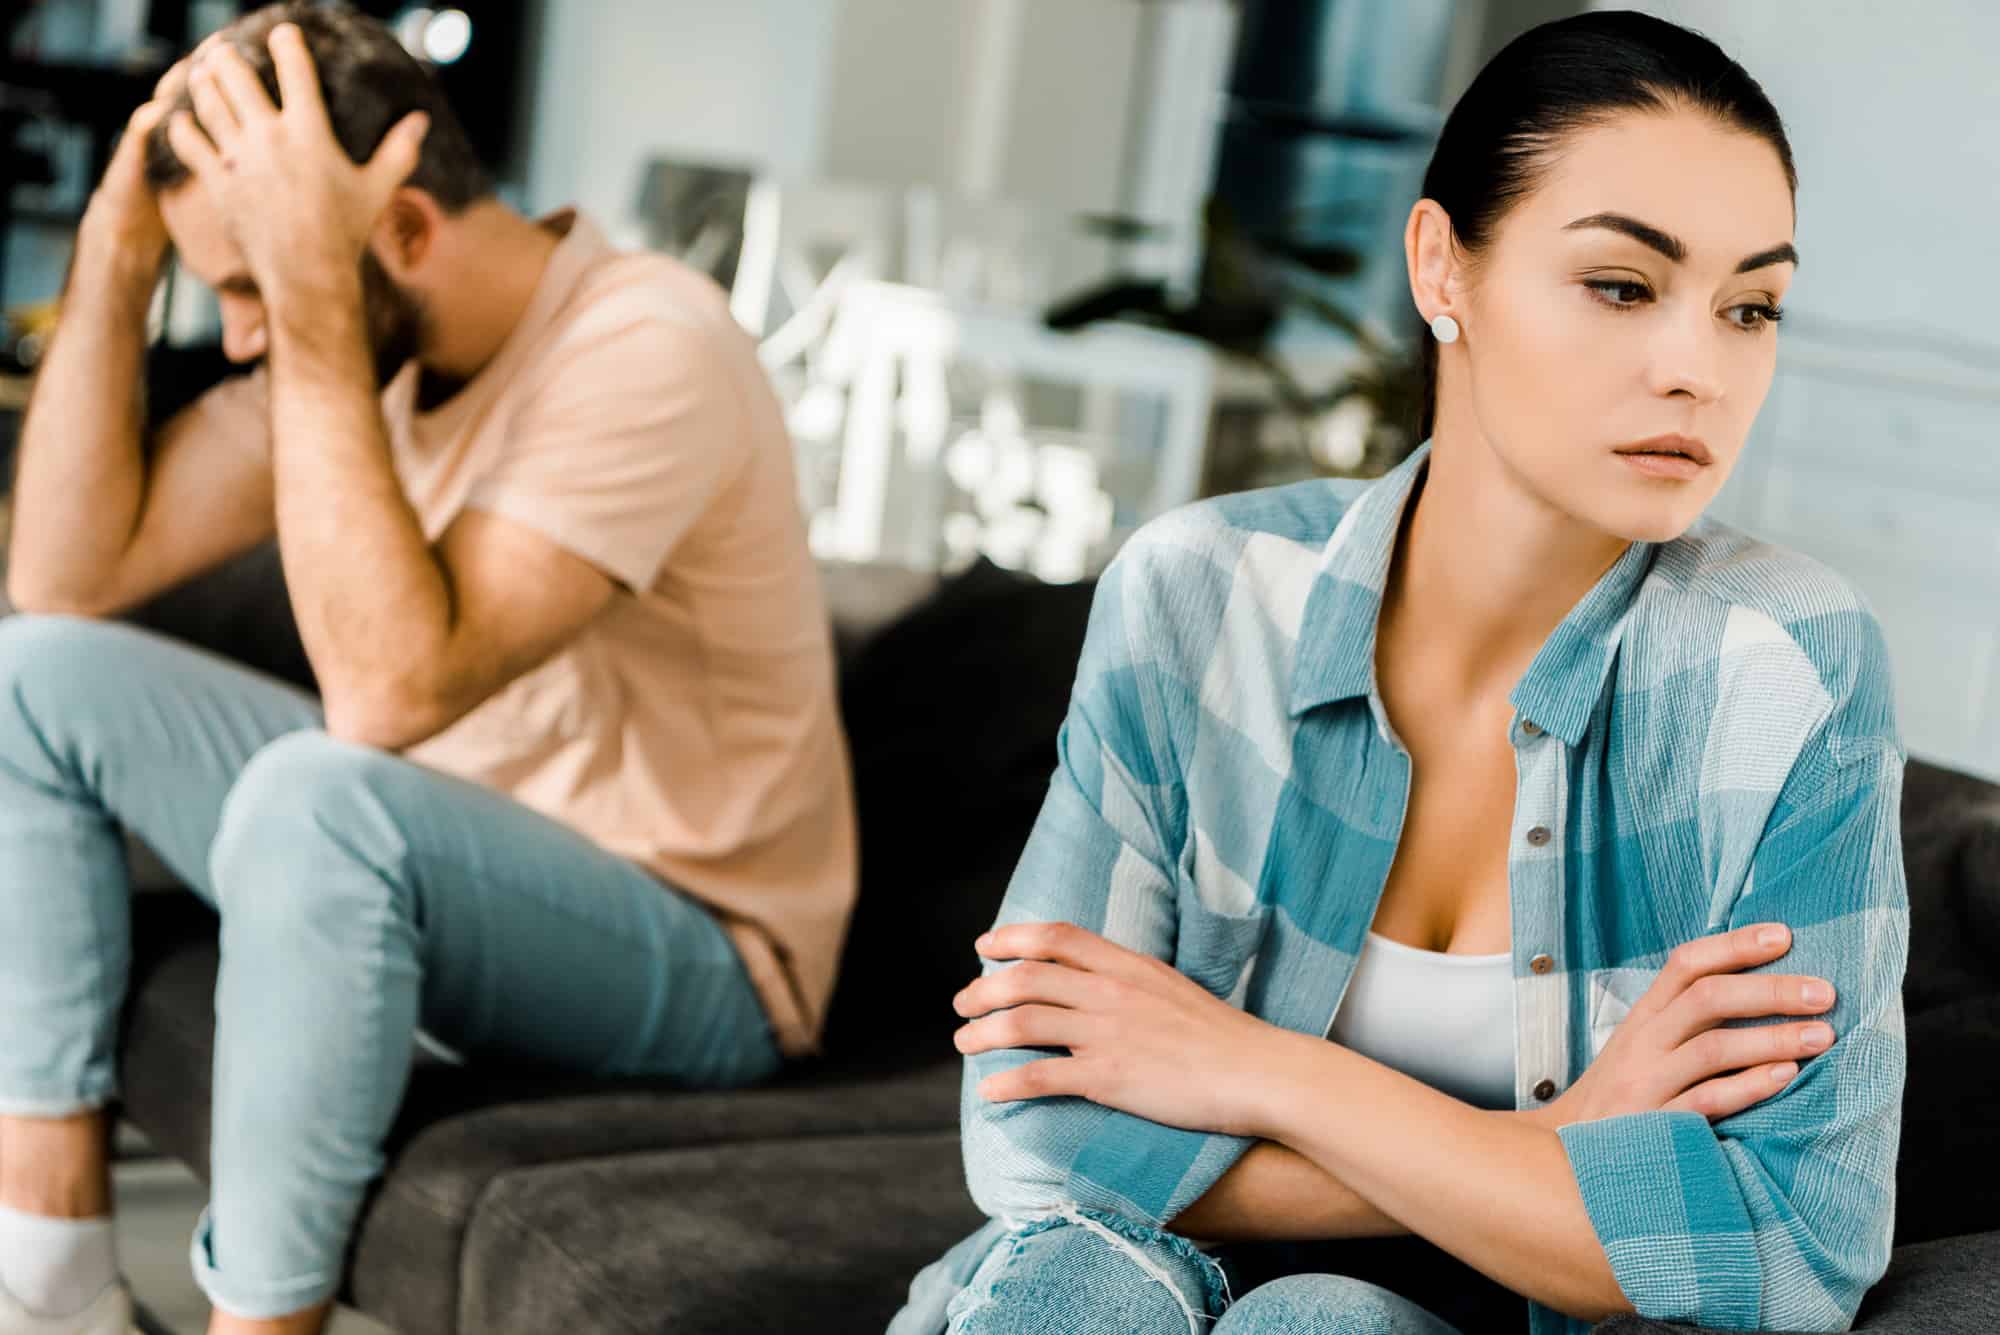 Overland IOP| #1 Intensive Outpatient Programs | Los Angeles CA DATING SOMEONE WITH DEPRESSION. TIPS FOR DATING & RED FLAGS.